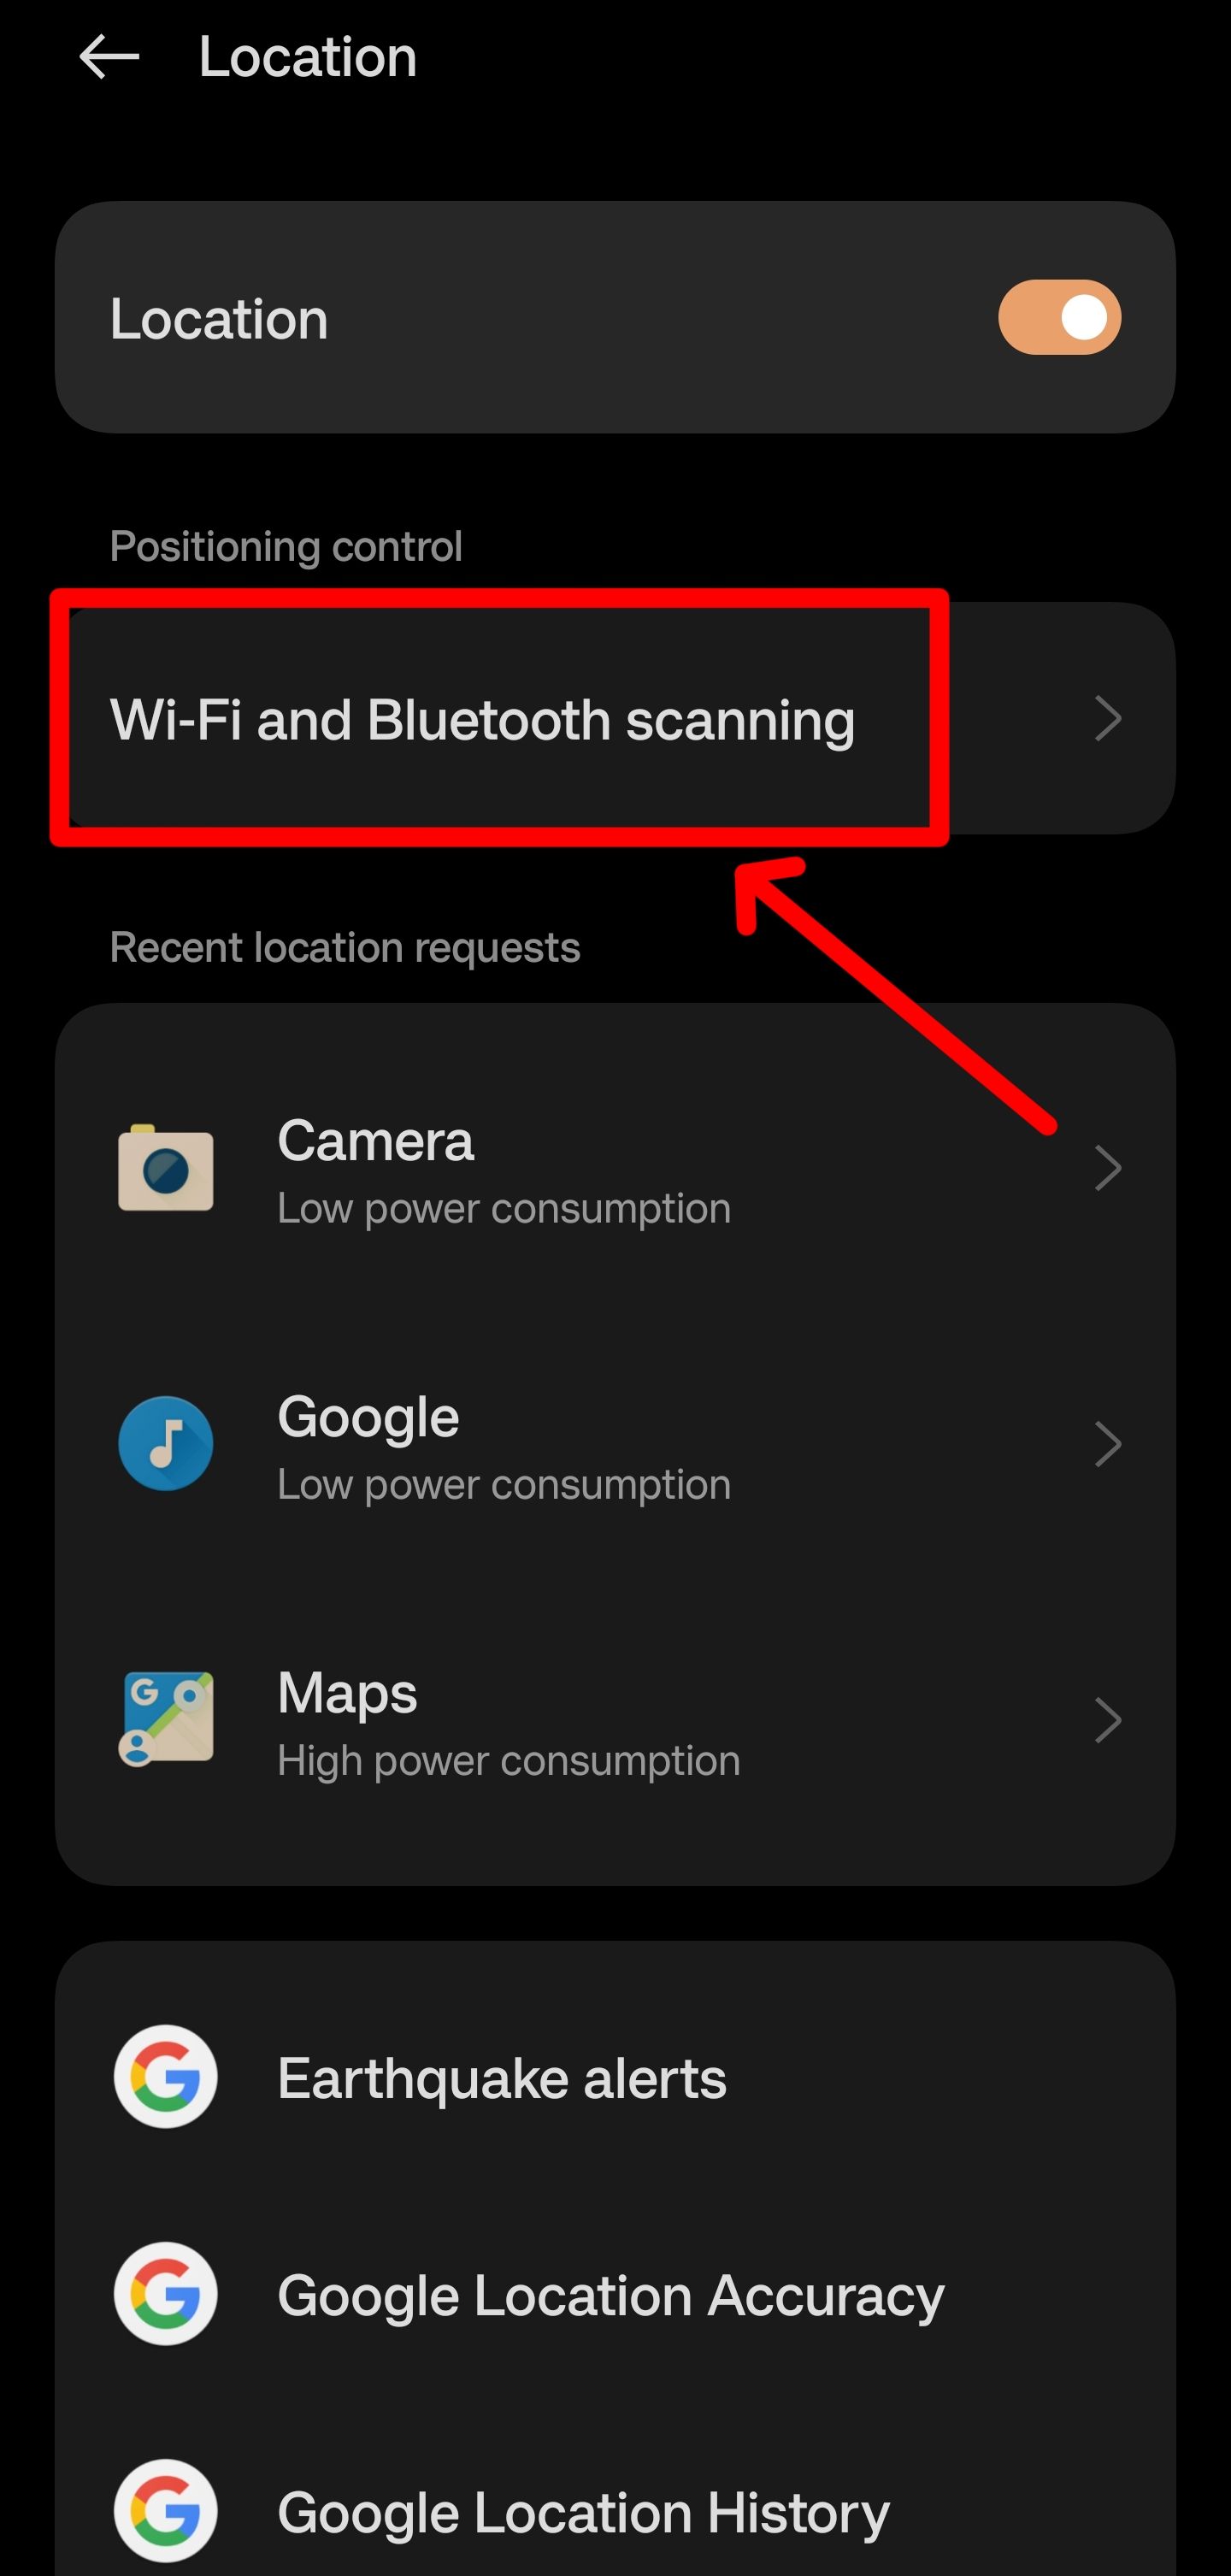 Select Wi-Fi and Bluetooth scanning to access their location options.